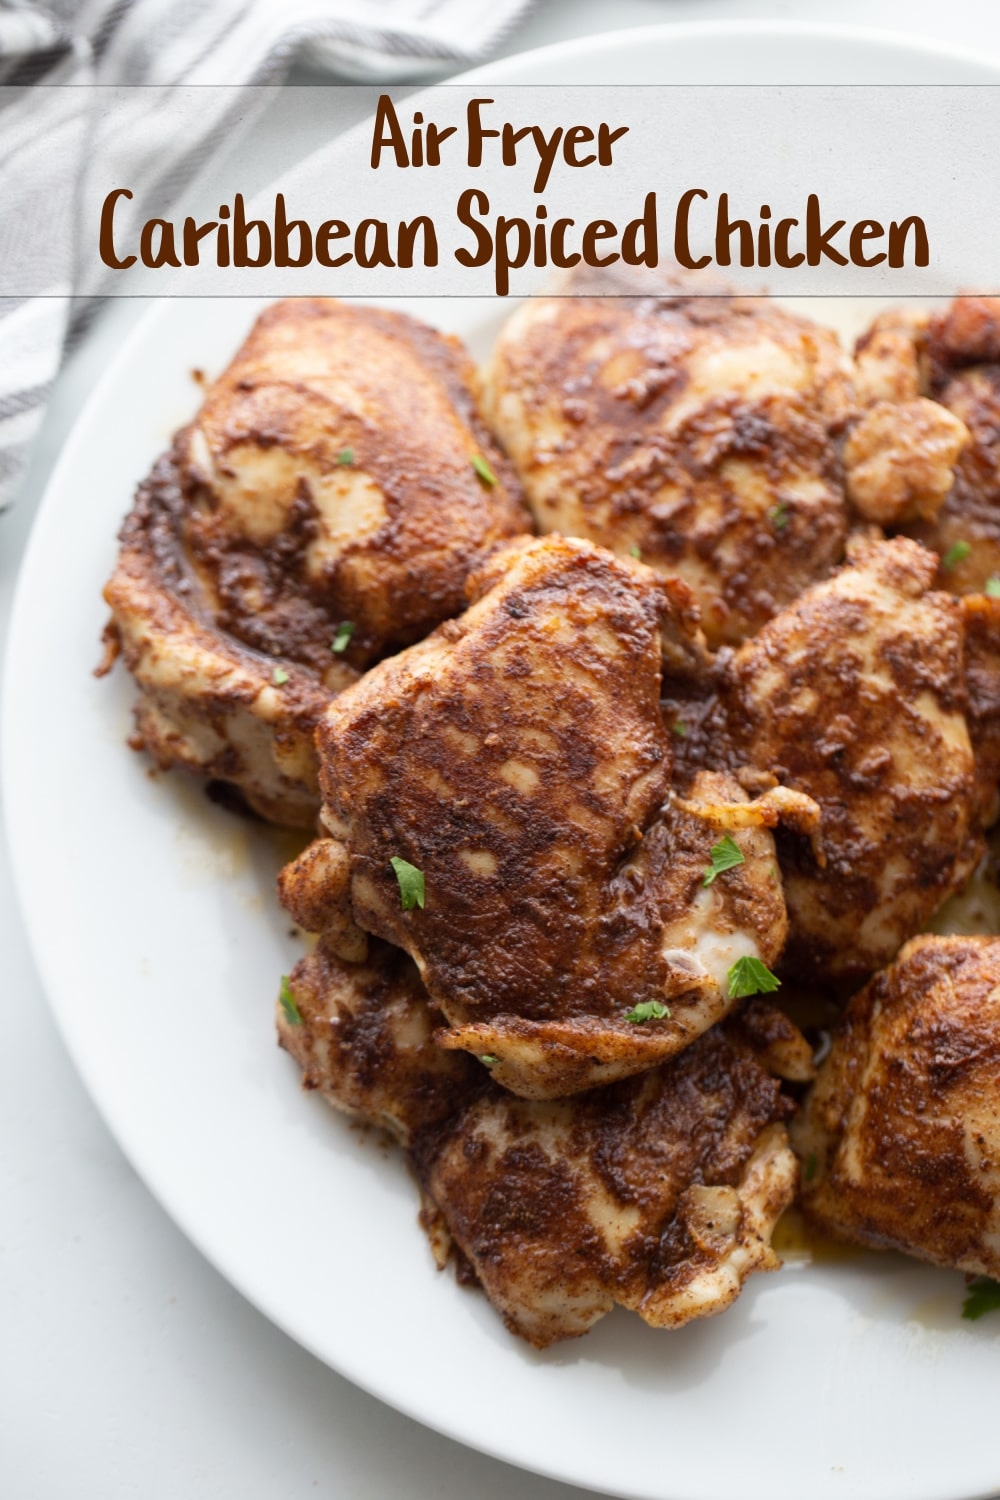 Every bite of this Air Fryer Caribbean Spiced Chicken is juicy, luscious and a testimony to the fragrant spices, flair and exotic flavors of the Caribbean. As usual, the air fryer locks in the juiciness and creates the perfect chicken every time. via @cmpollak1